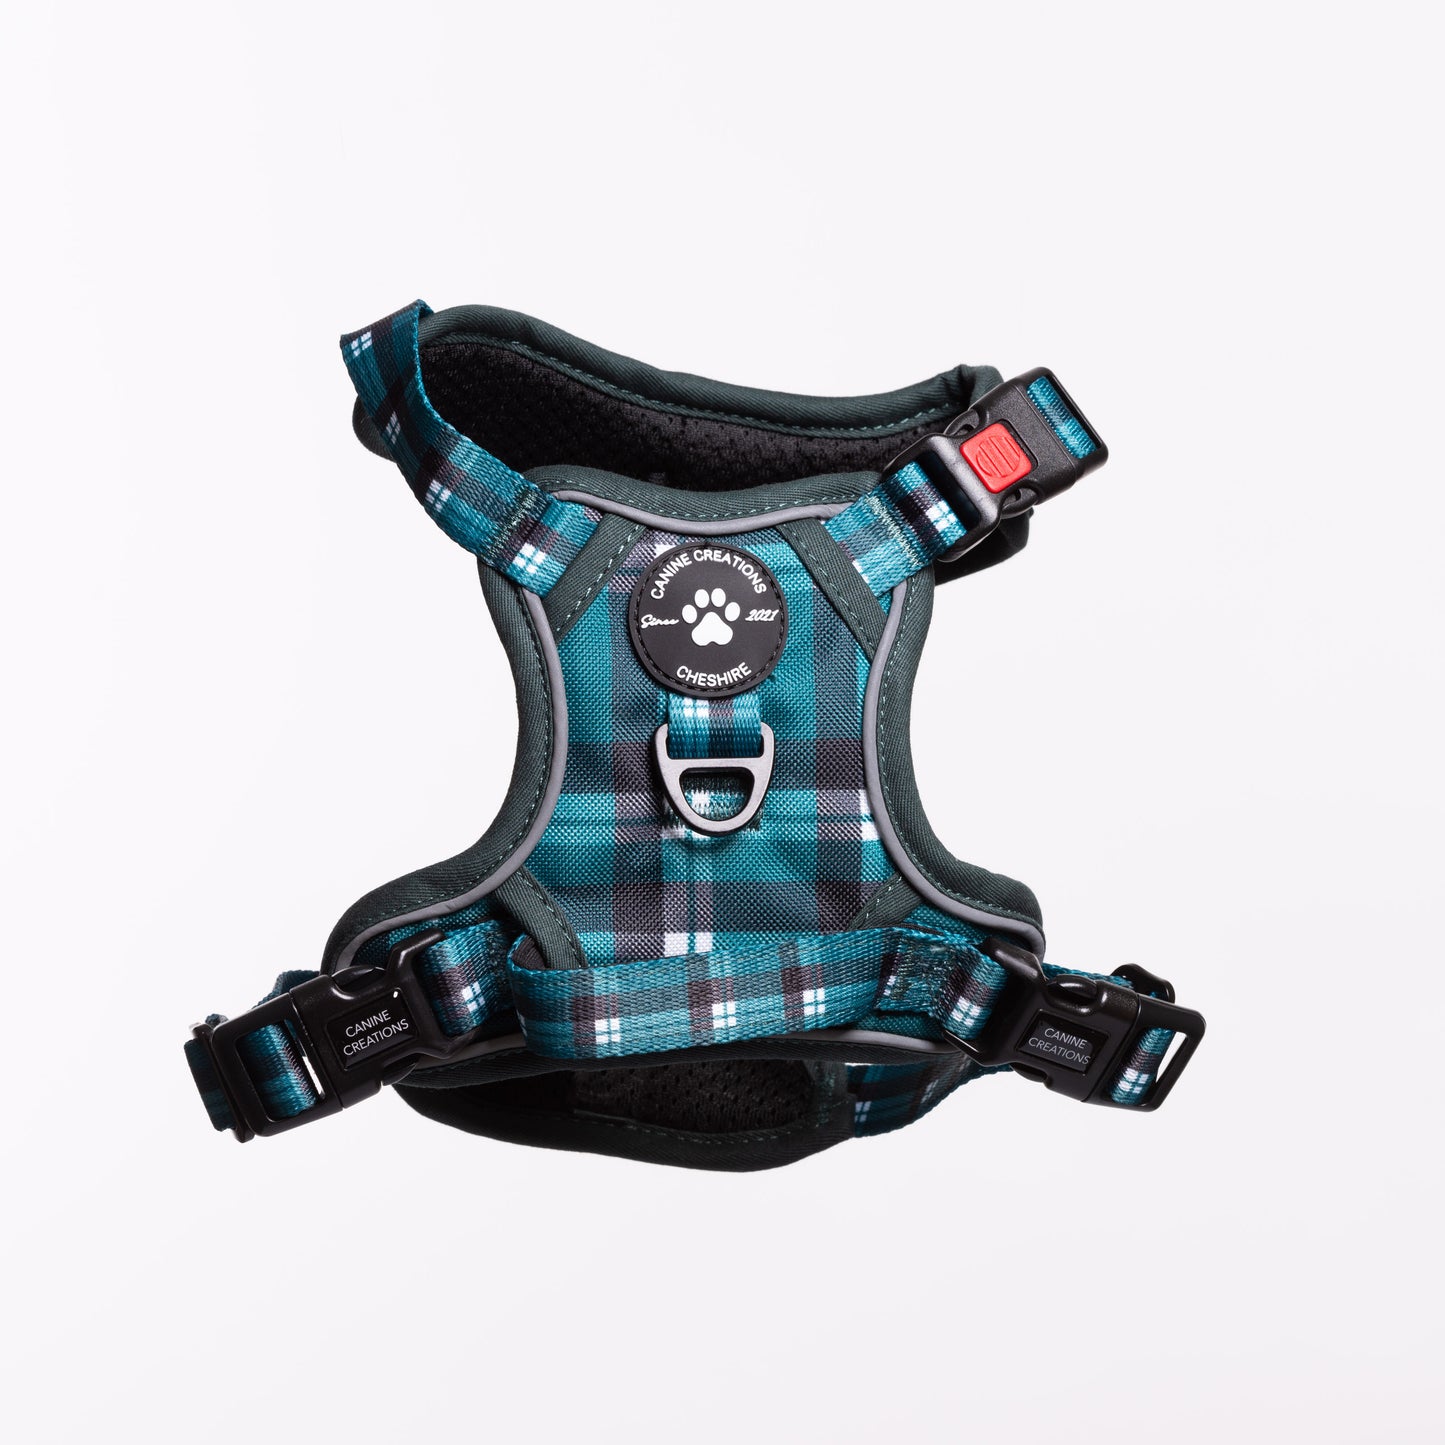 Harness, Lead & Poo Bag Bundle - Chequered